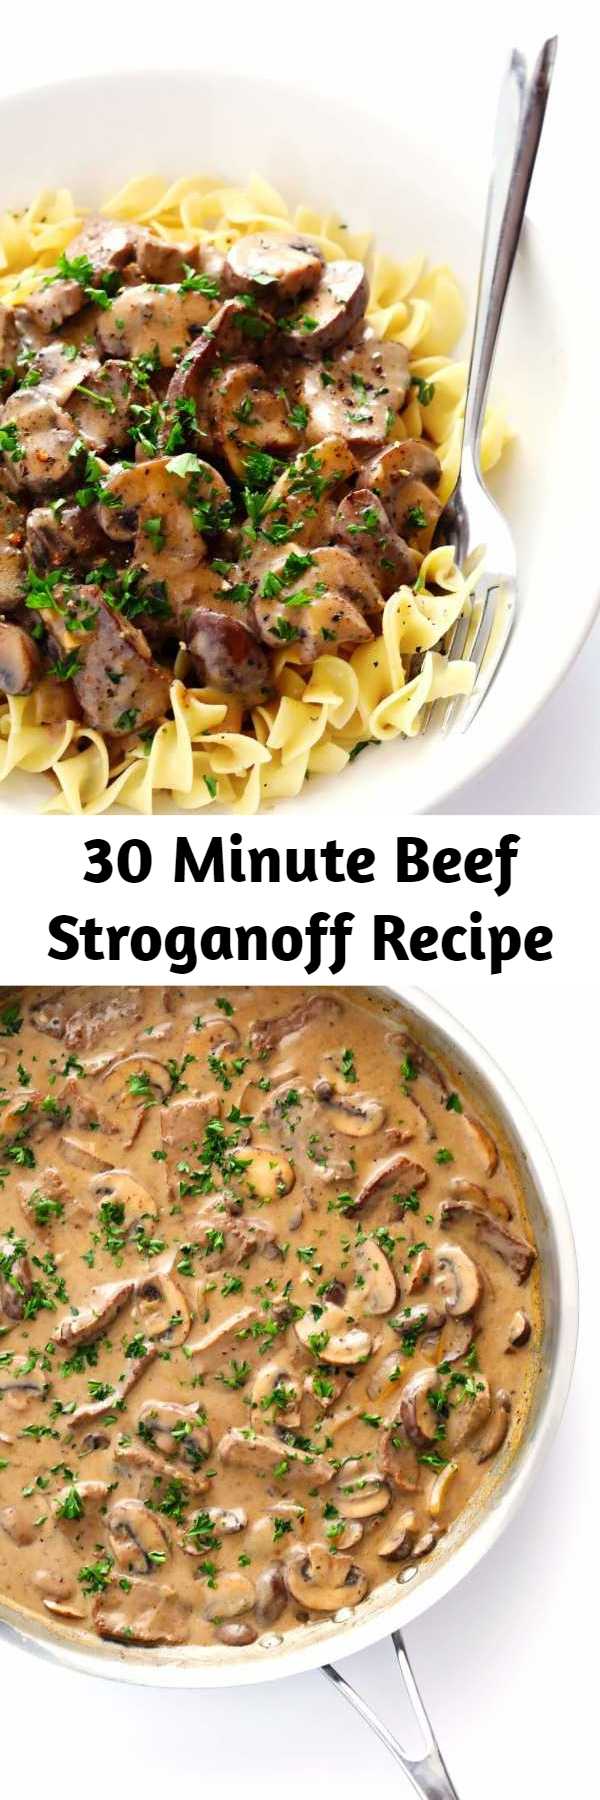 30 Minute Beef Stroganoff Recipe - Classic beef stroganoff is cooked with an amazing creamy mushroom sauce and served over egg noodles. And it all comes together in under 30 minutes!